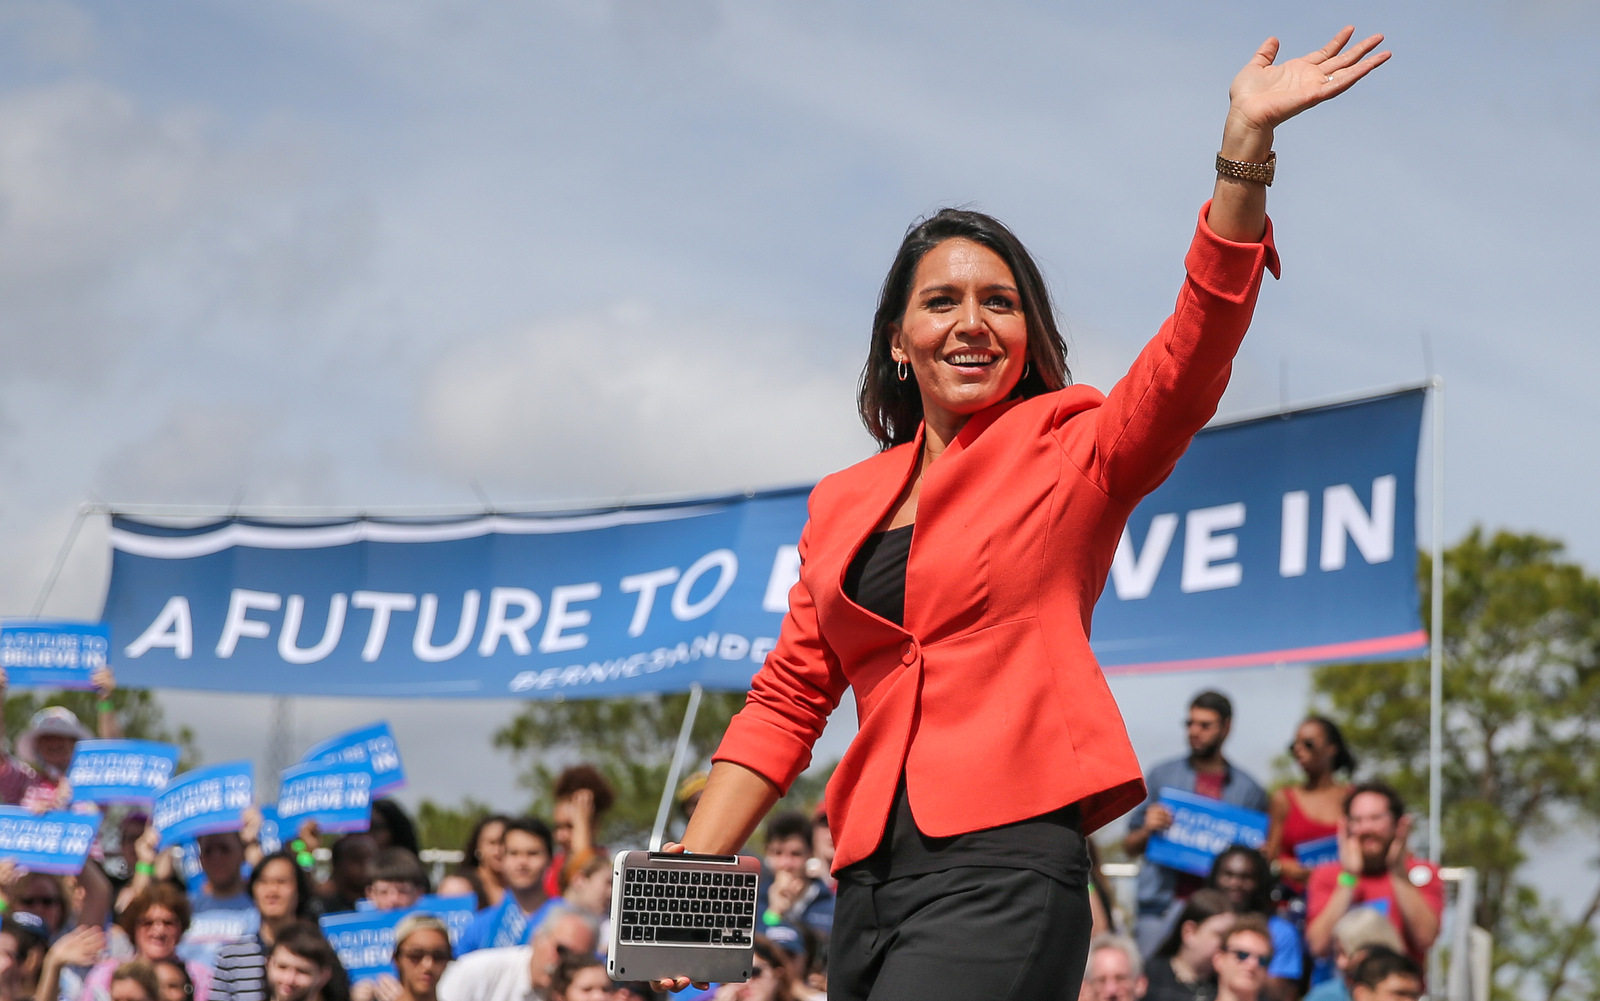 Rep. Tulsi Gabbard, D-Hi., arrives to introduce Democratic presidential candidate, Sen. Bernie Sanders, I-Vt., at a campaign rally at the University of Florida in Gainesville, Fla., March 10, 2016. (AP/Gary McCullough)